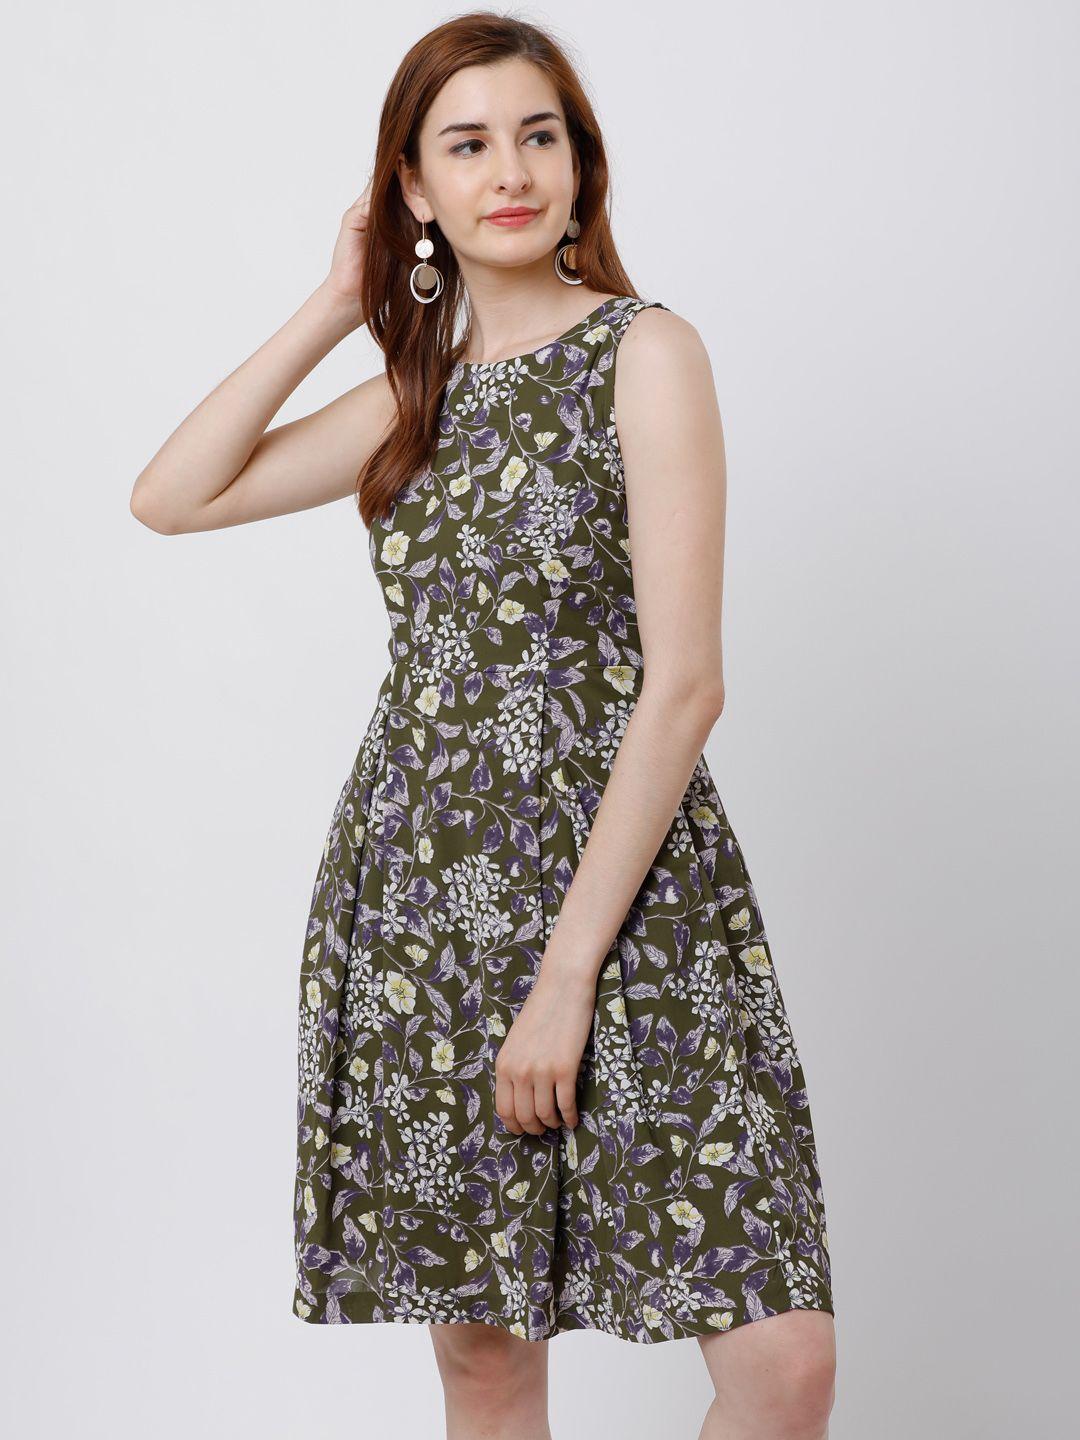 tokyo talkies women olive green printed fit and flare dress